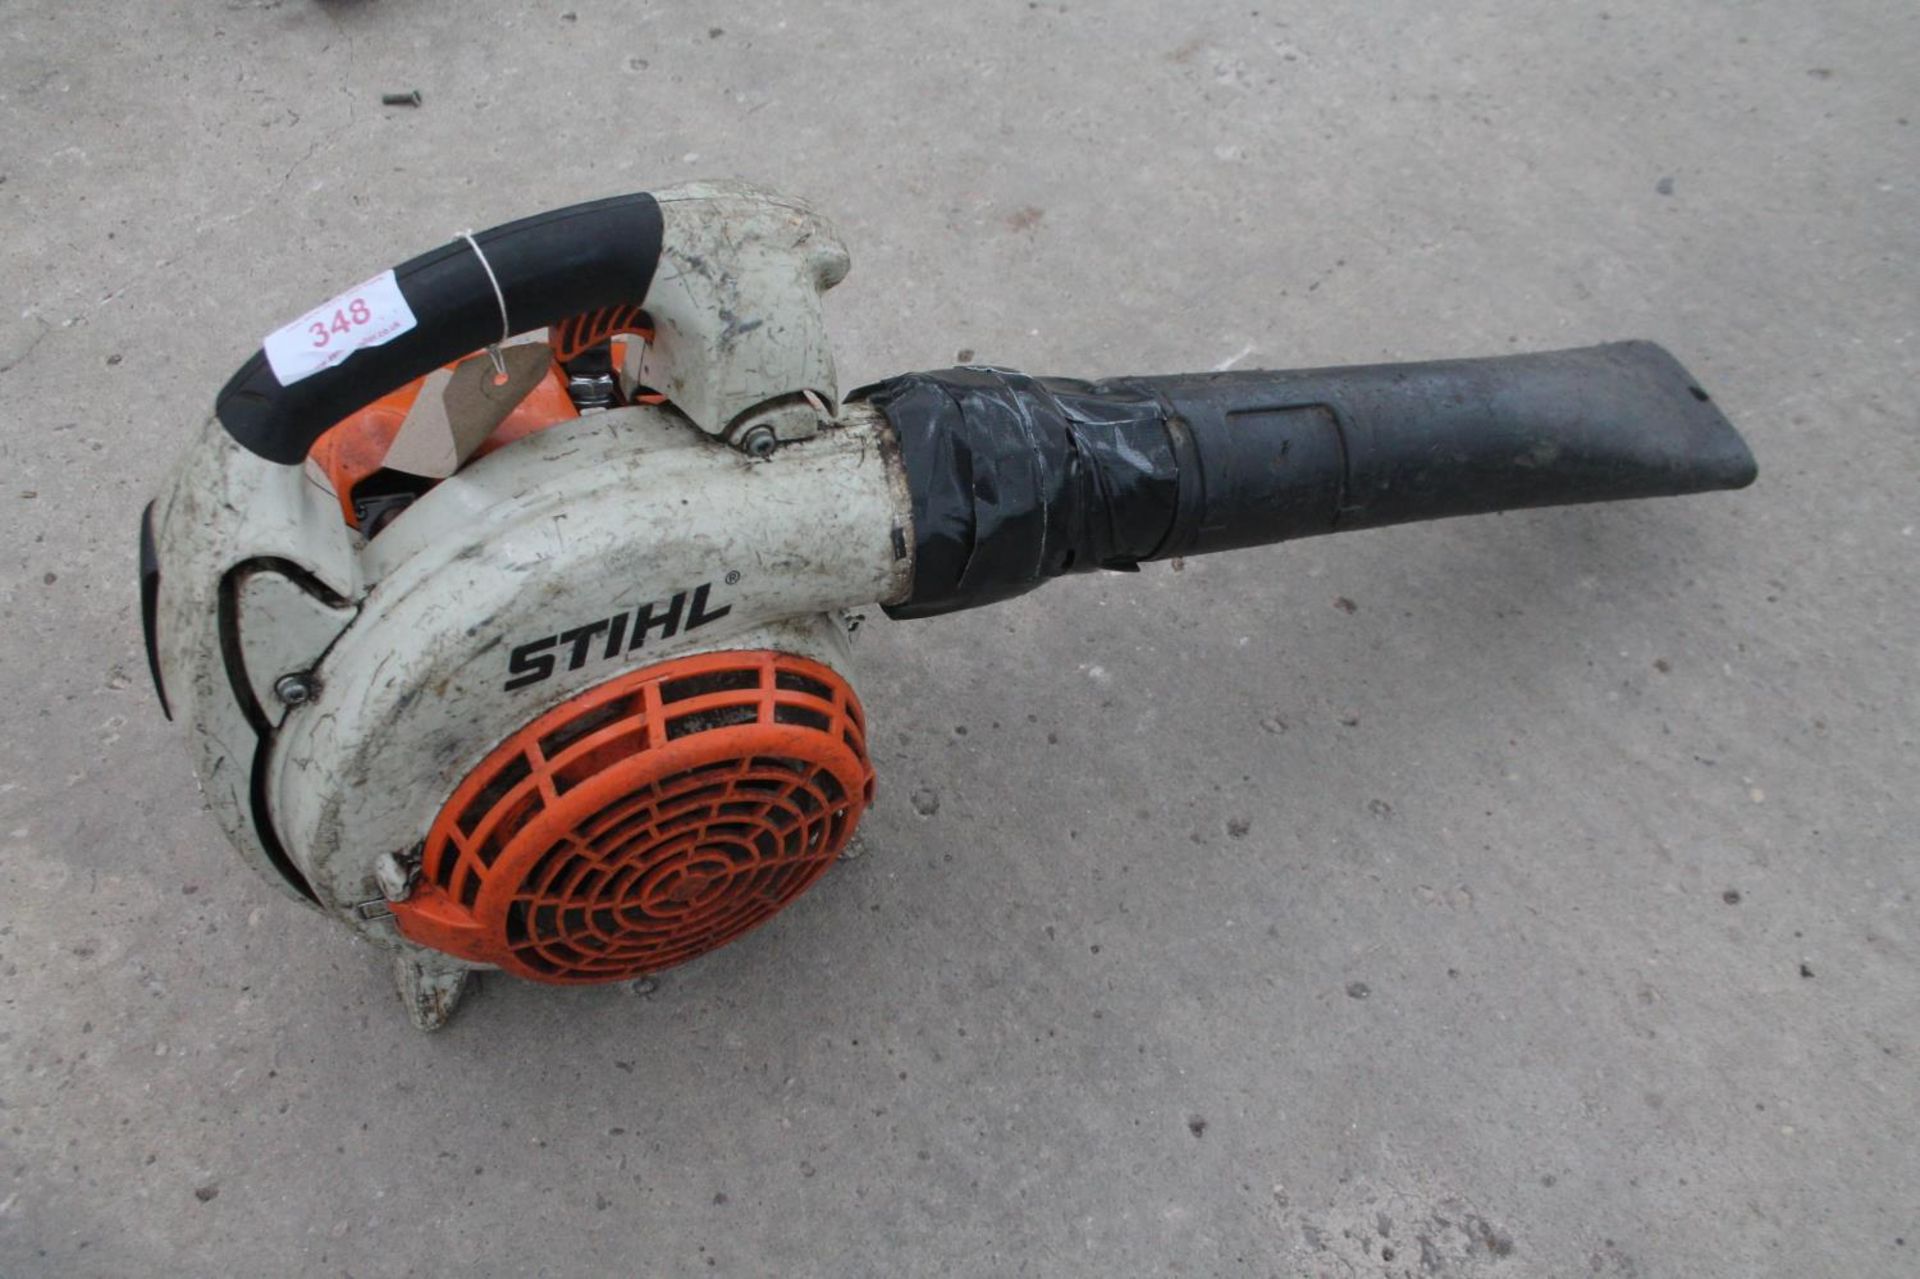 STHIL HAND HELD LEAF BLOWER NO VAT FROM A RETIREMENT DISPERSAL